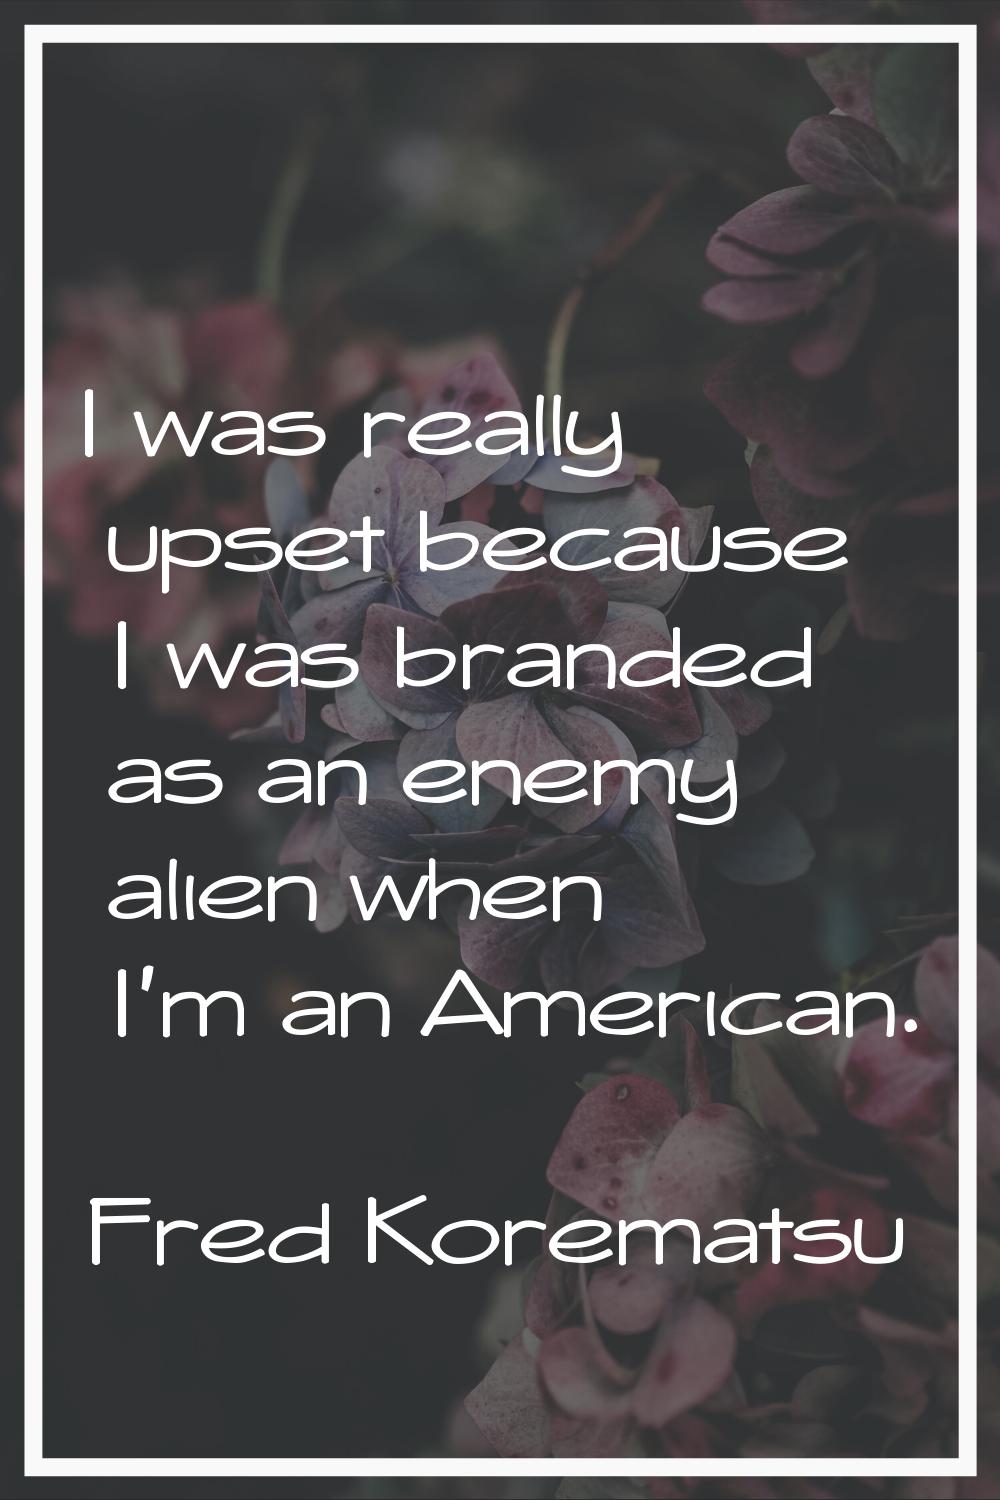 I was really upset because I was branded as an enemy alien when I'm an American.